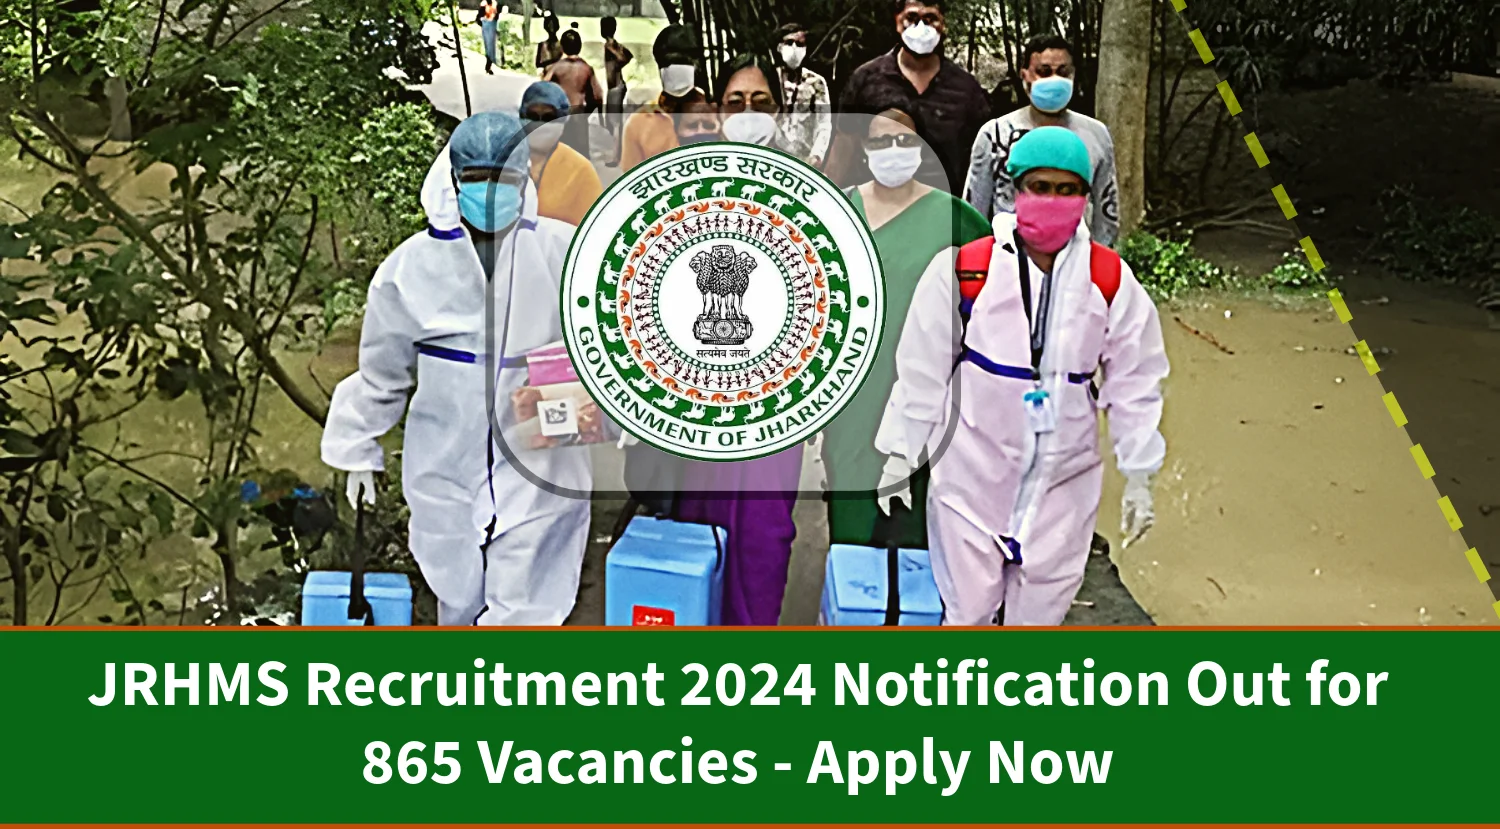 JRHMS Recruitment 2024 Notification Out for 865 Vacancies